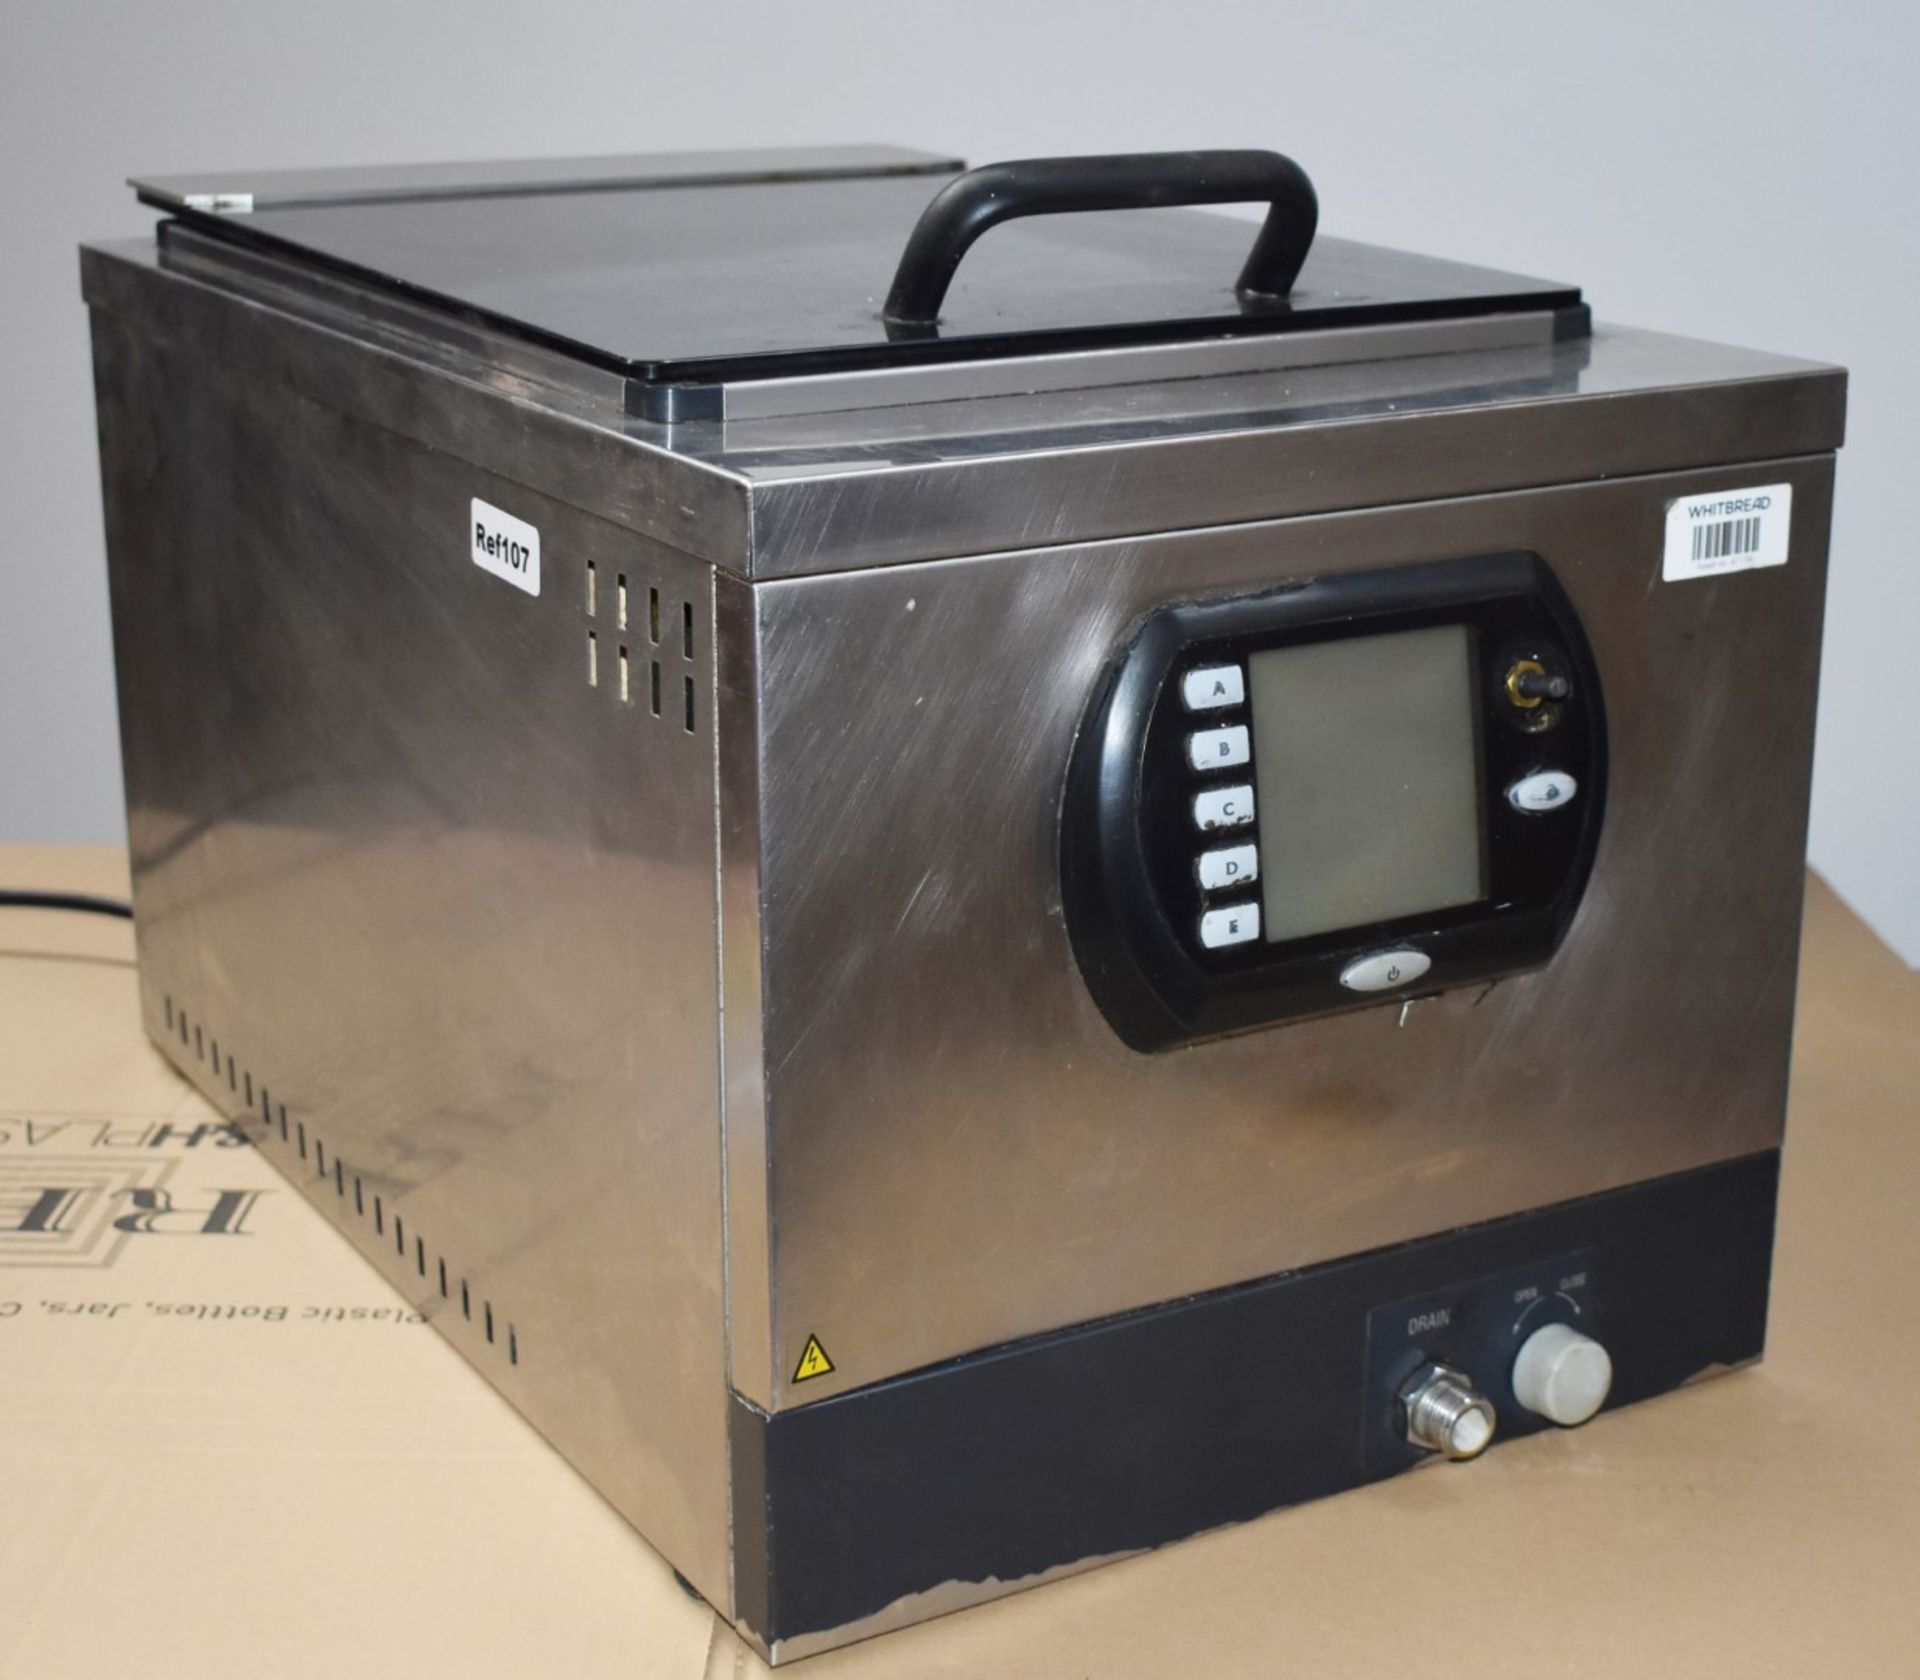 1 x Instanta SV38 Sous Vide Digital Water Bath - CL232 - Ref107 - Stainless Steel Finish - Location: